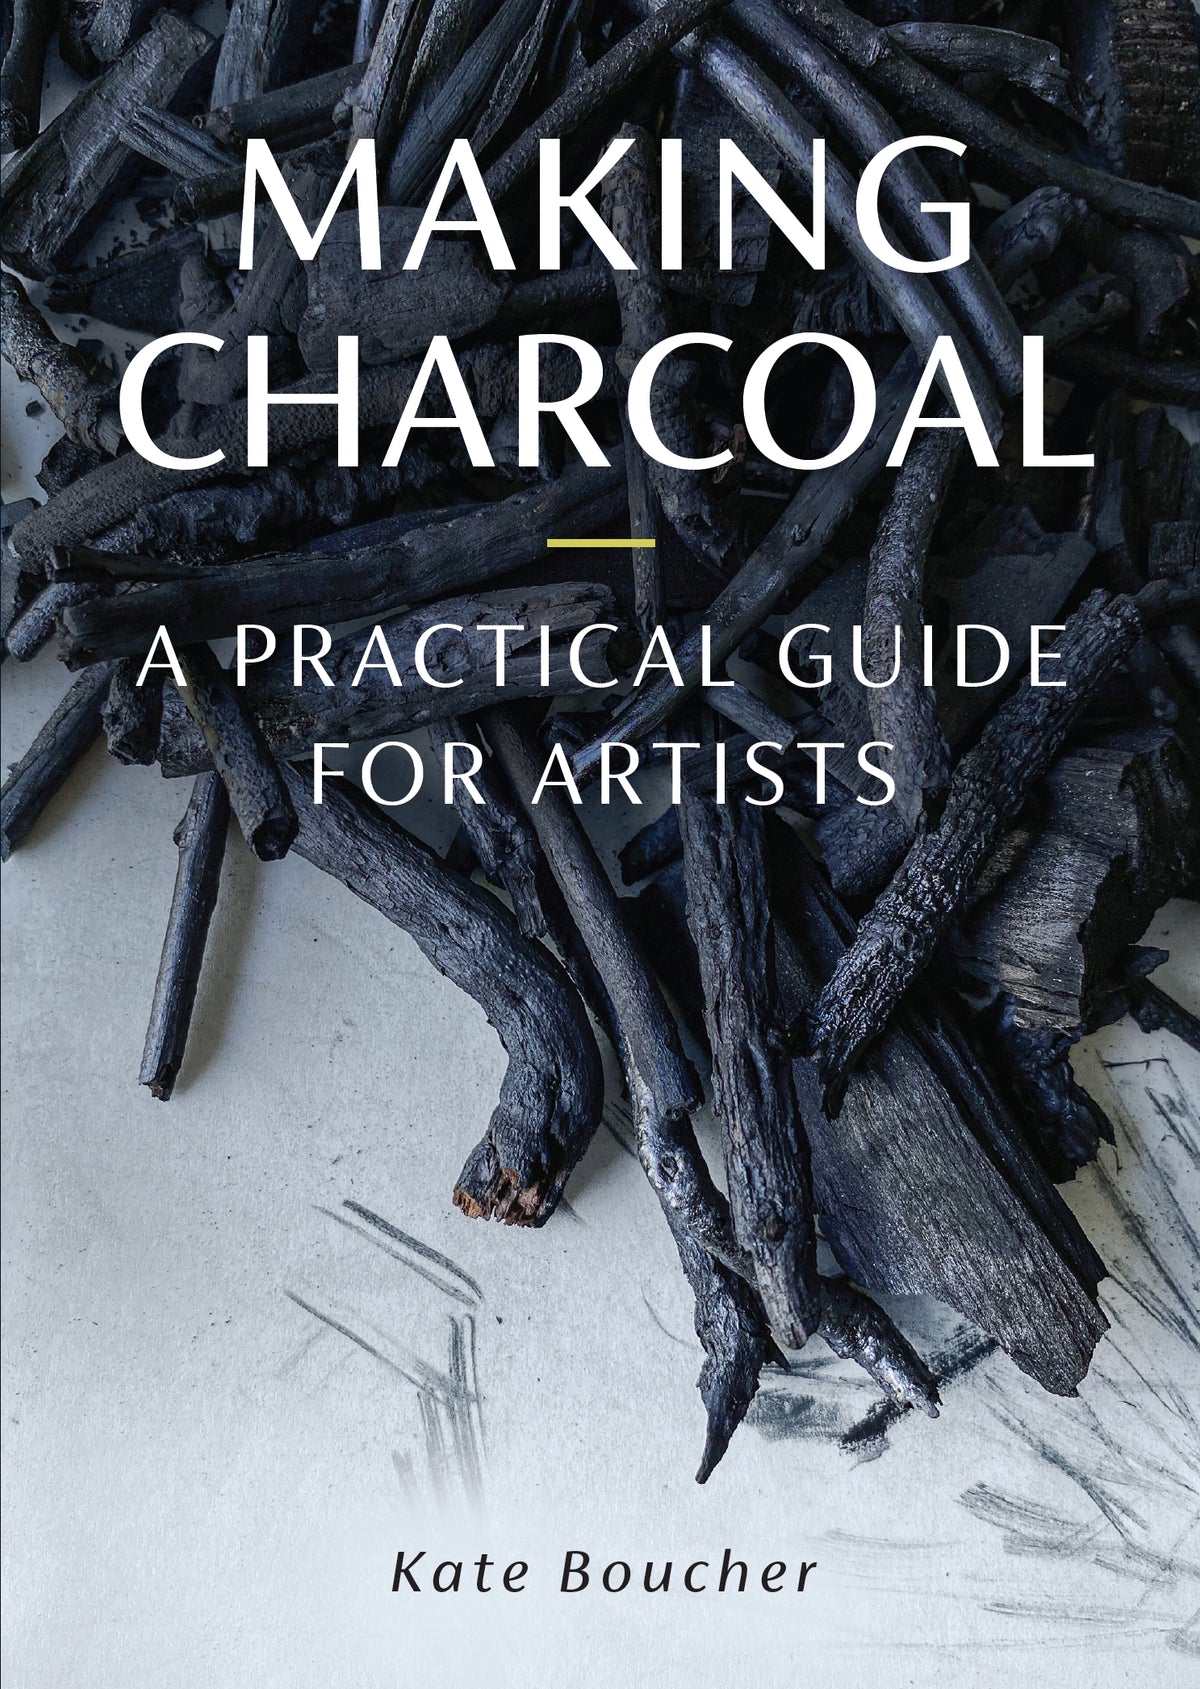 Making Charcoal for Artists